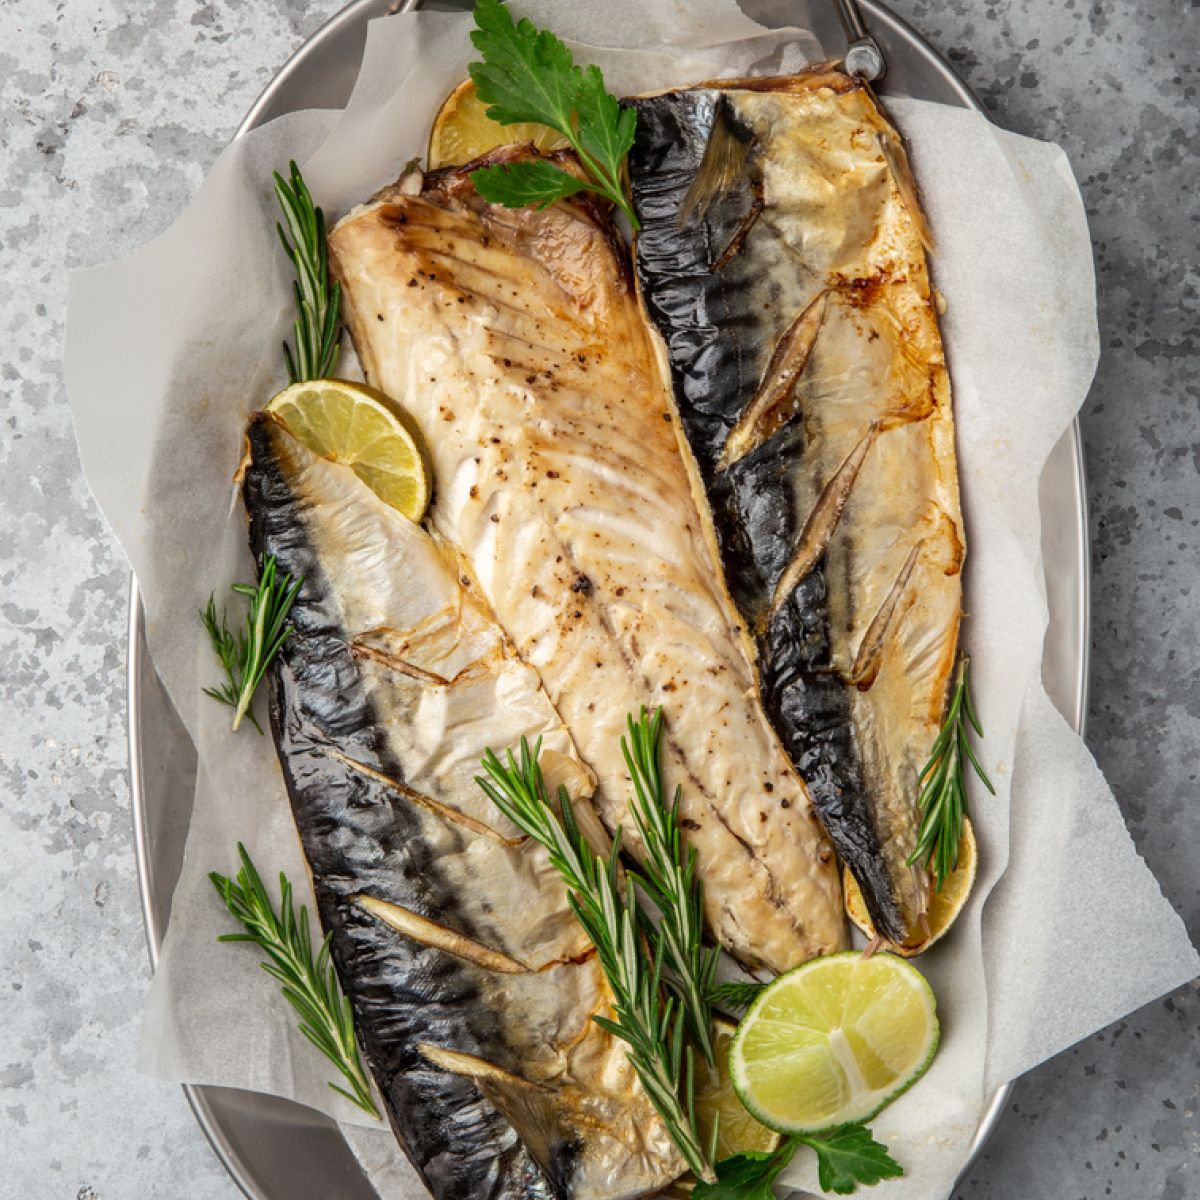 Asian-Style Fish Baked in Paper with Lemon and Herbs